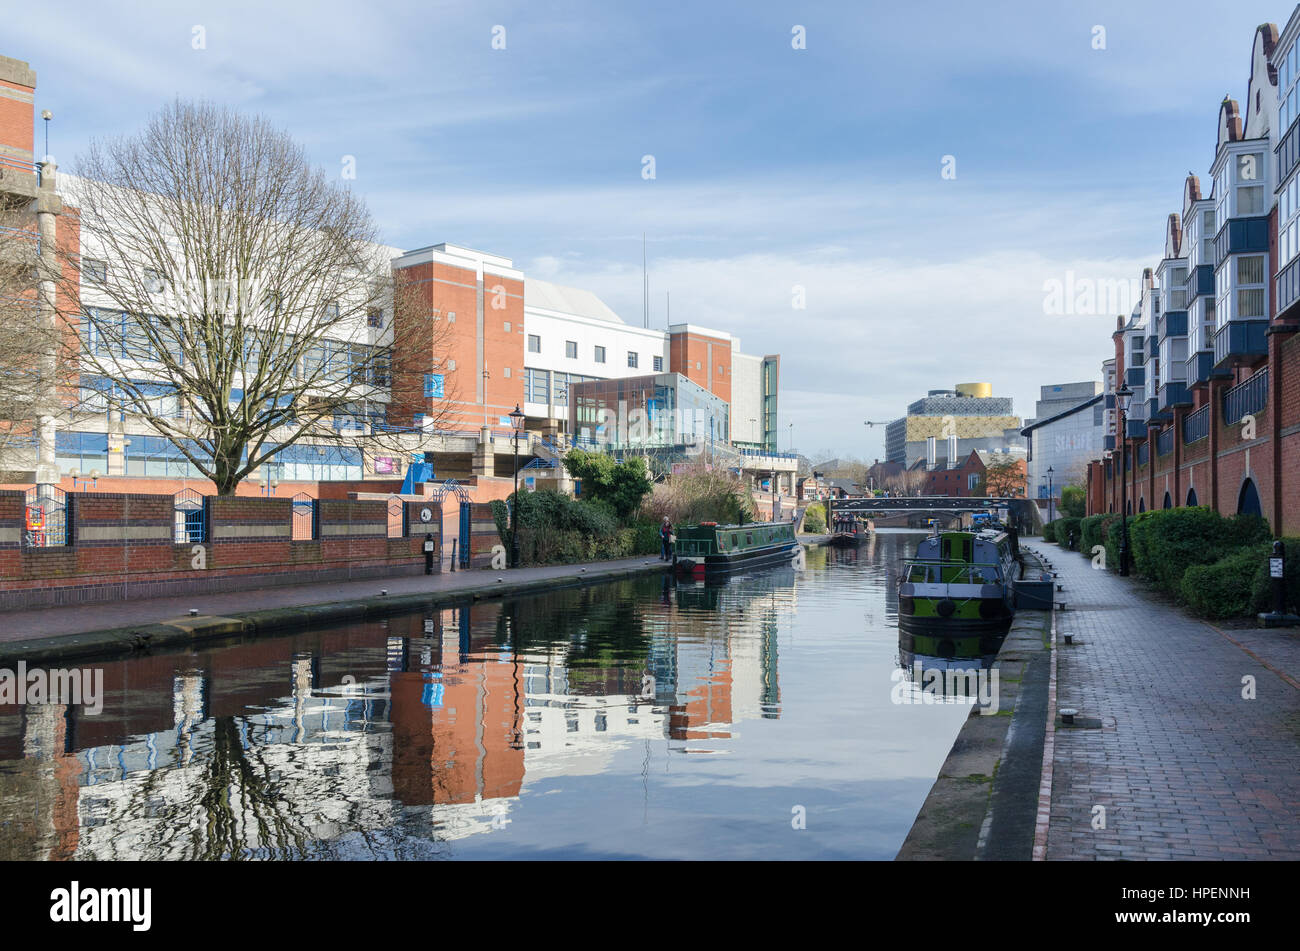 View along a canal in Birmingham looking towards Brindley Place and Library of Birmingham Stock Photo